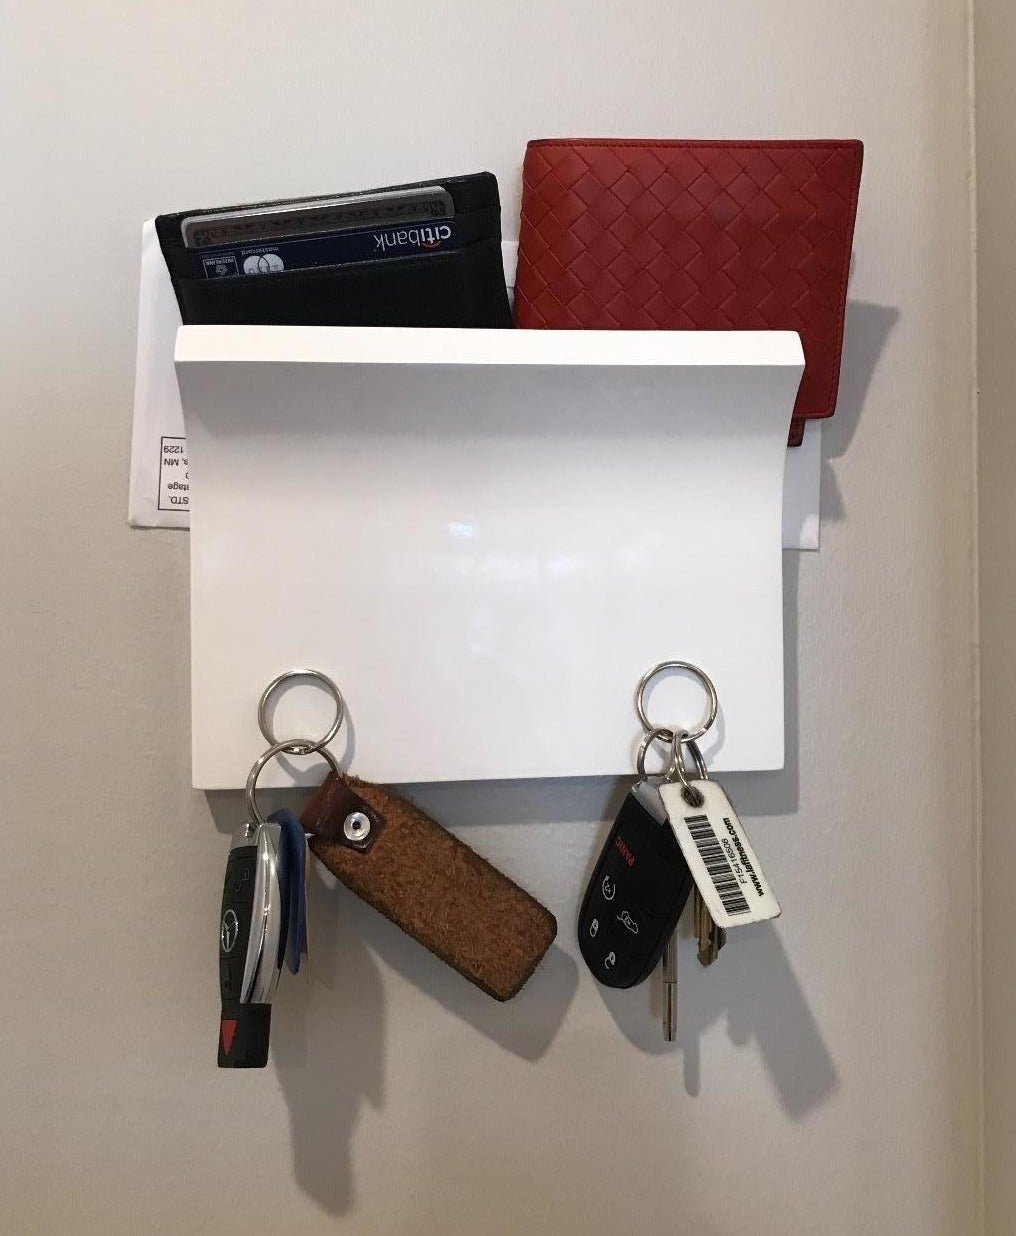 the white organizer mounted to the wall holding some mail two wallets and two sets of keys